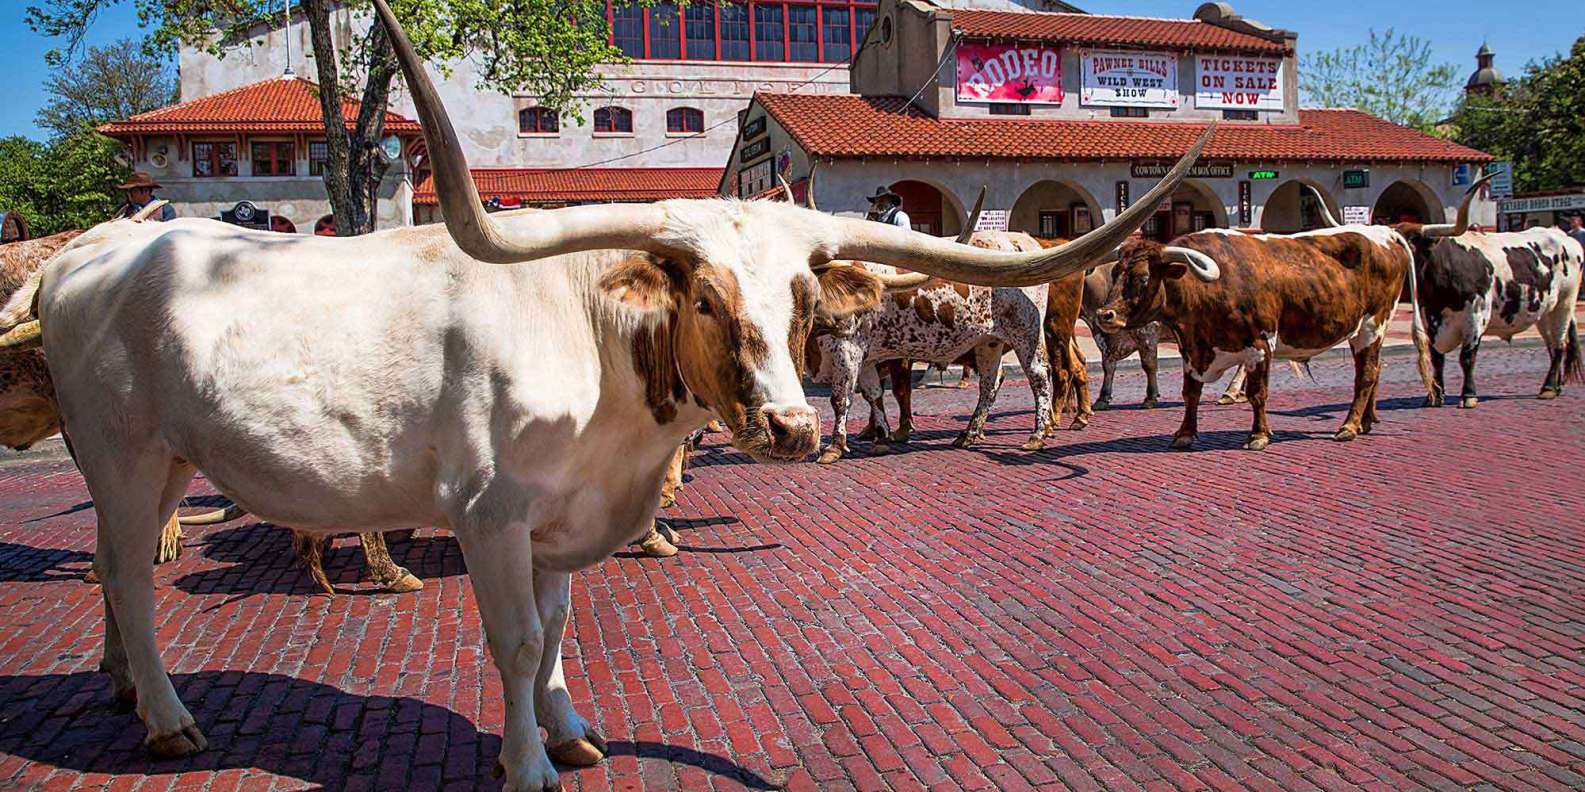 What to do in Fort Worth